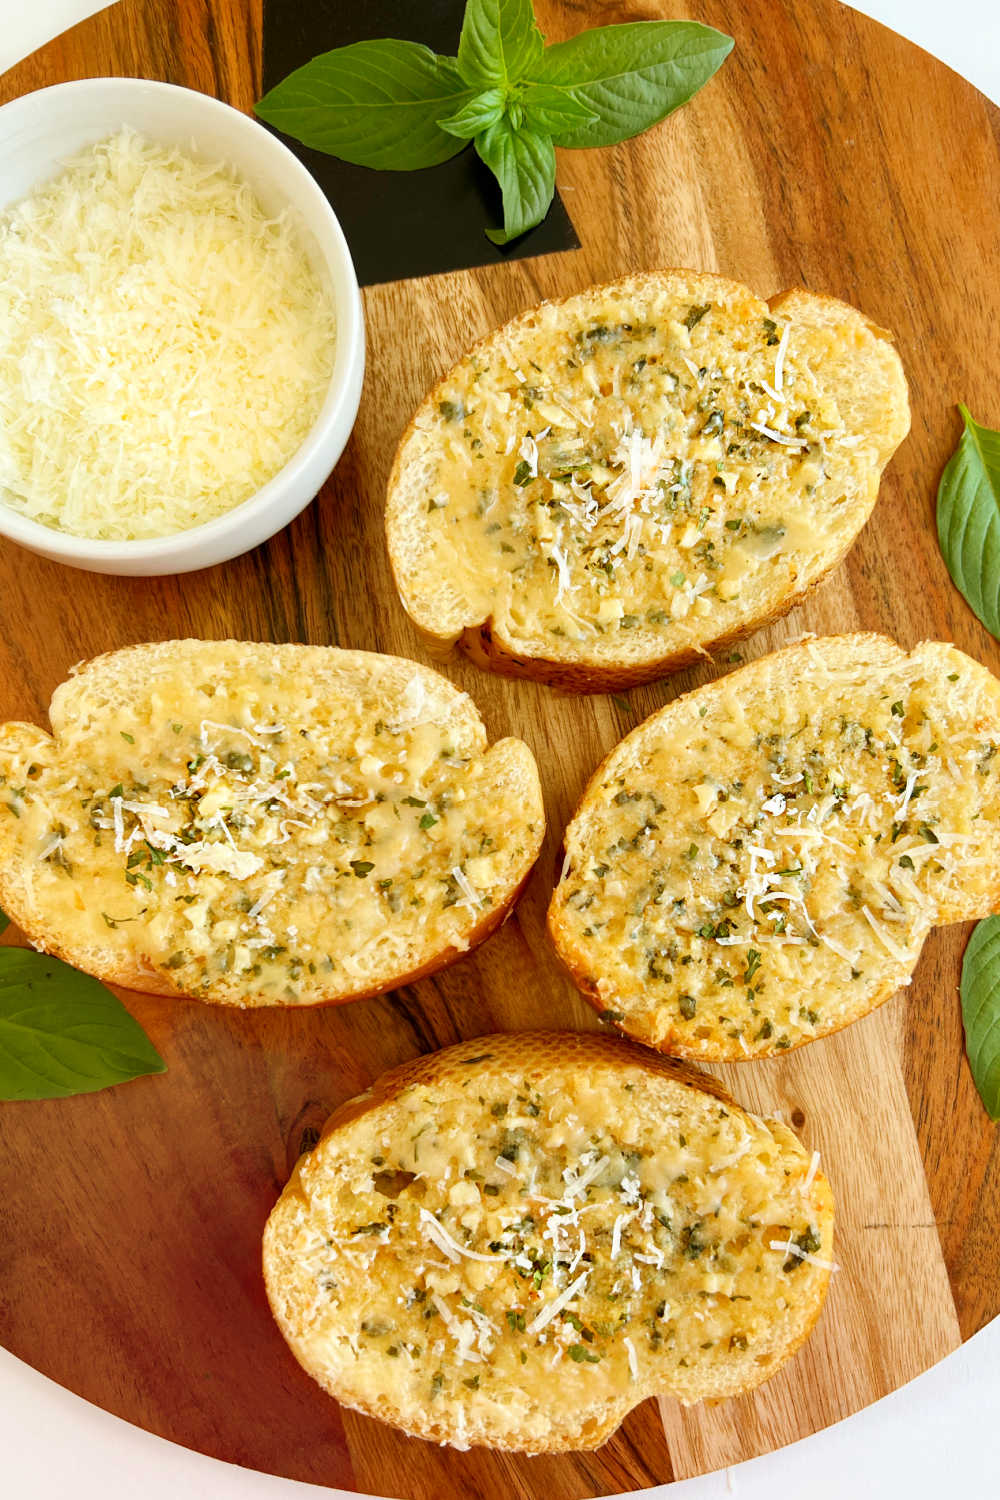 homemade garlic bread slices from french bread with Parmesan cheese